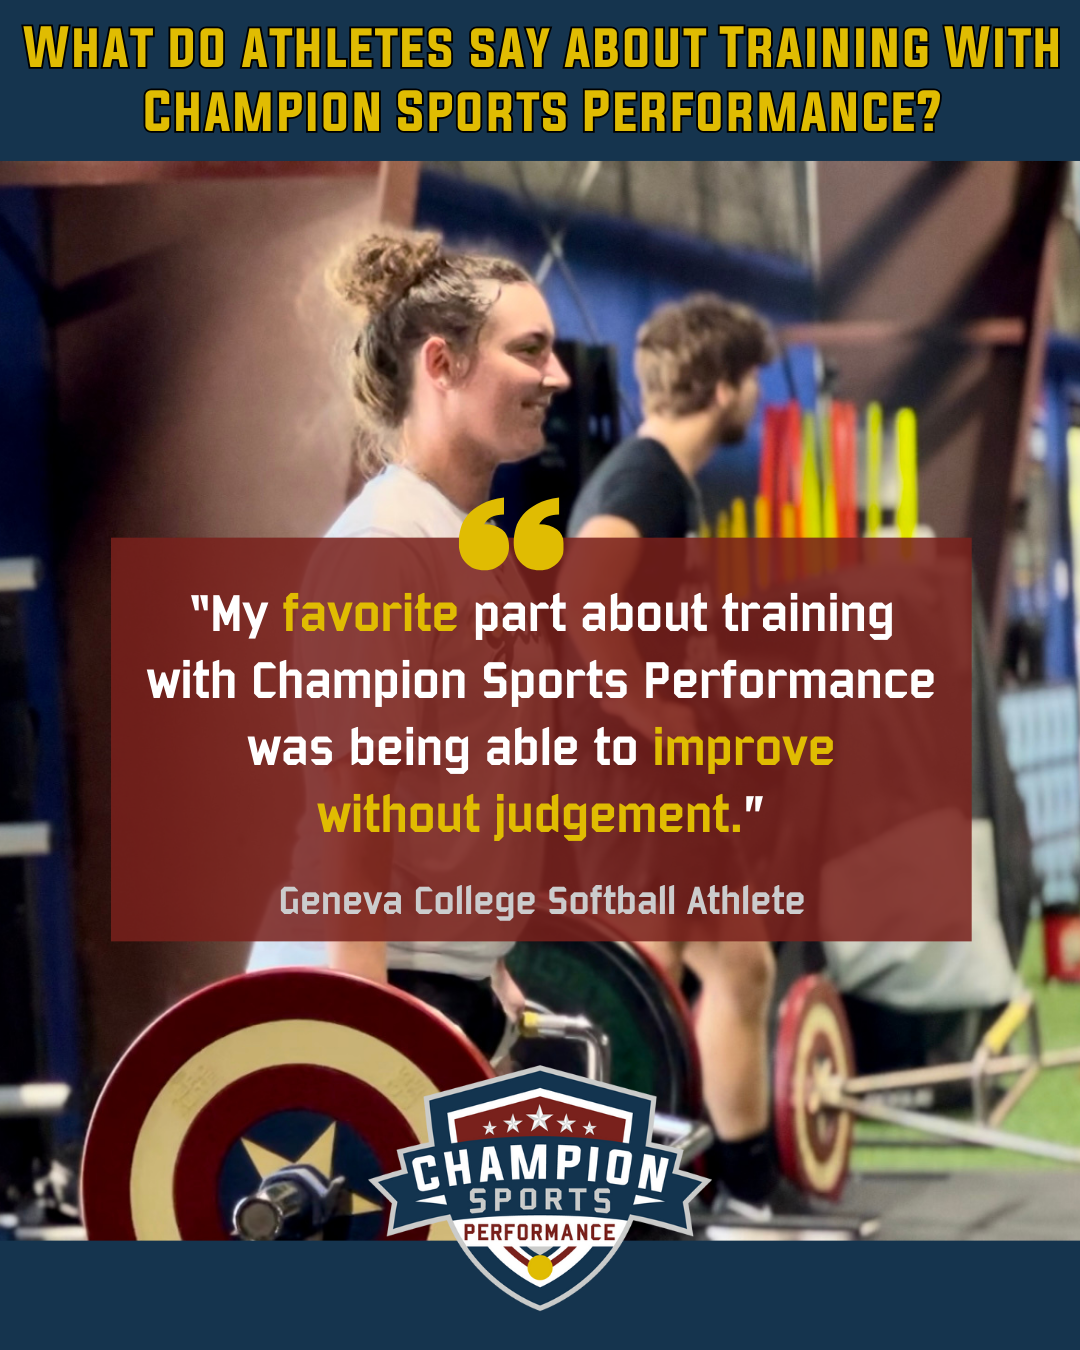 My favorite part about training with Champion Sports Performance was being able to improve without judgement.